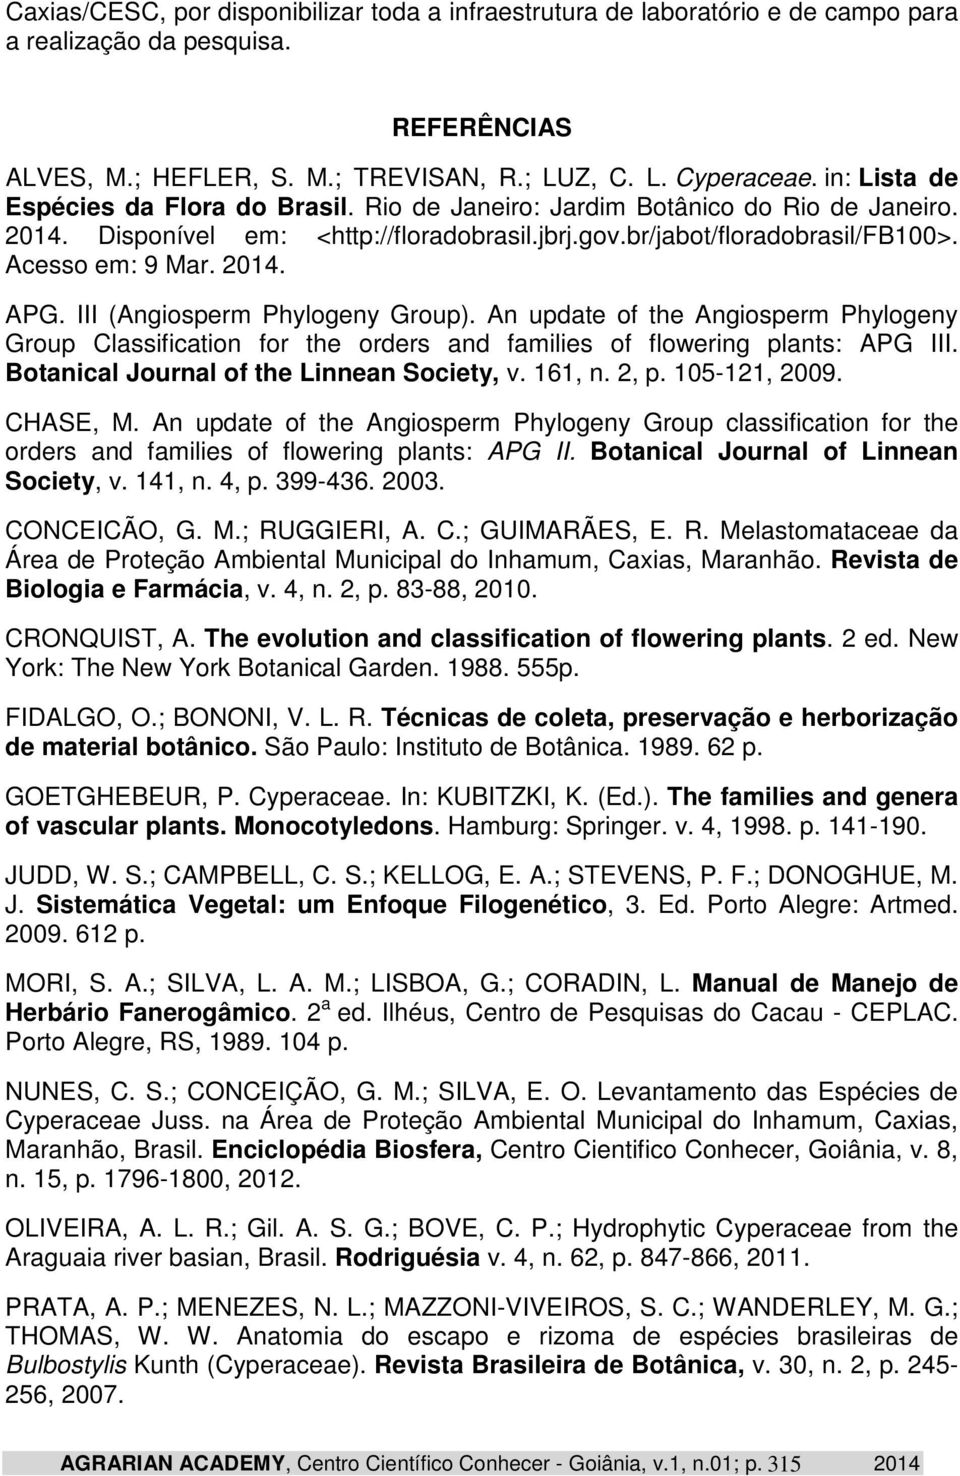 III (Angiosperm Phylogeny Group). An update of the Angiosperm Phylogeny Group Classification for the orders and families of flowering plants: APG III. Botanical Journal of the Linnean Society, v.